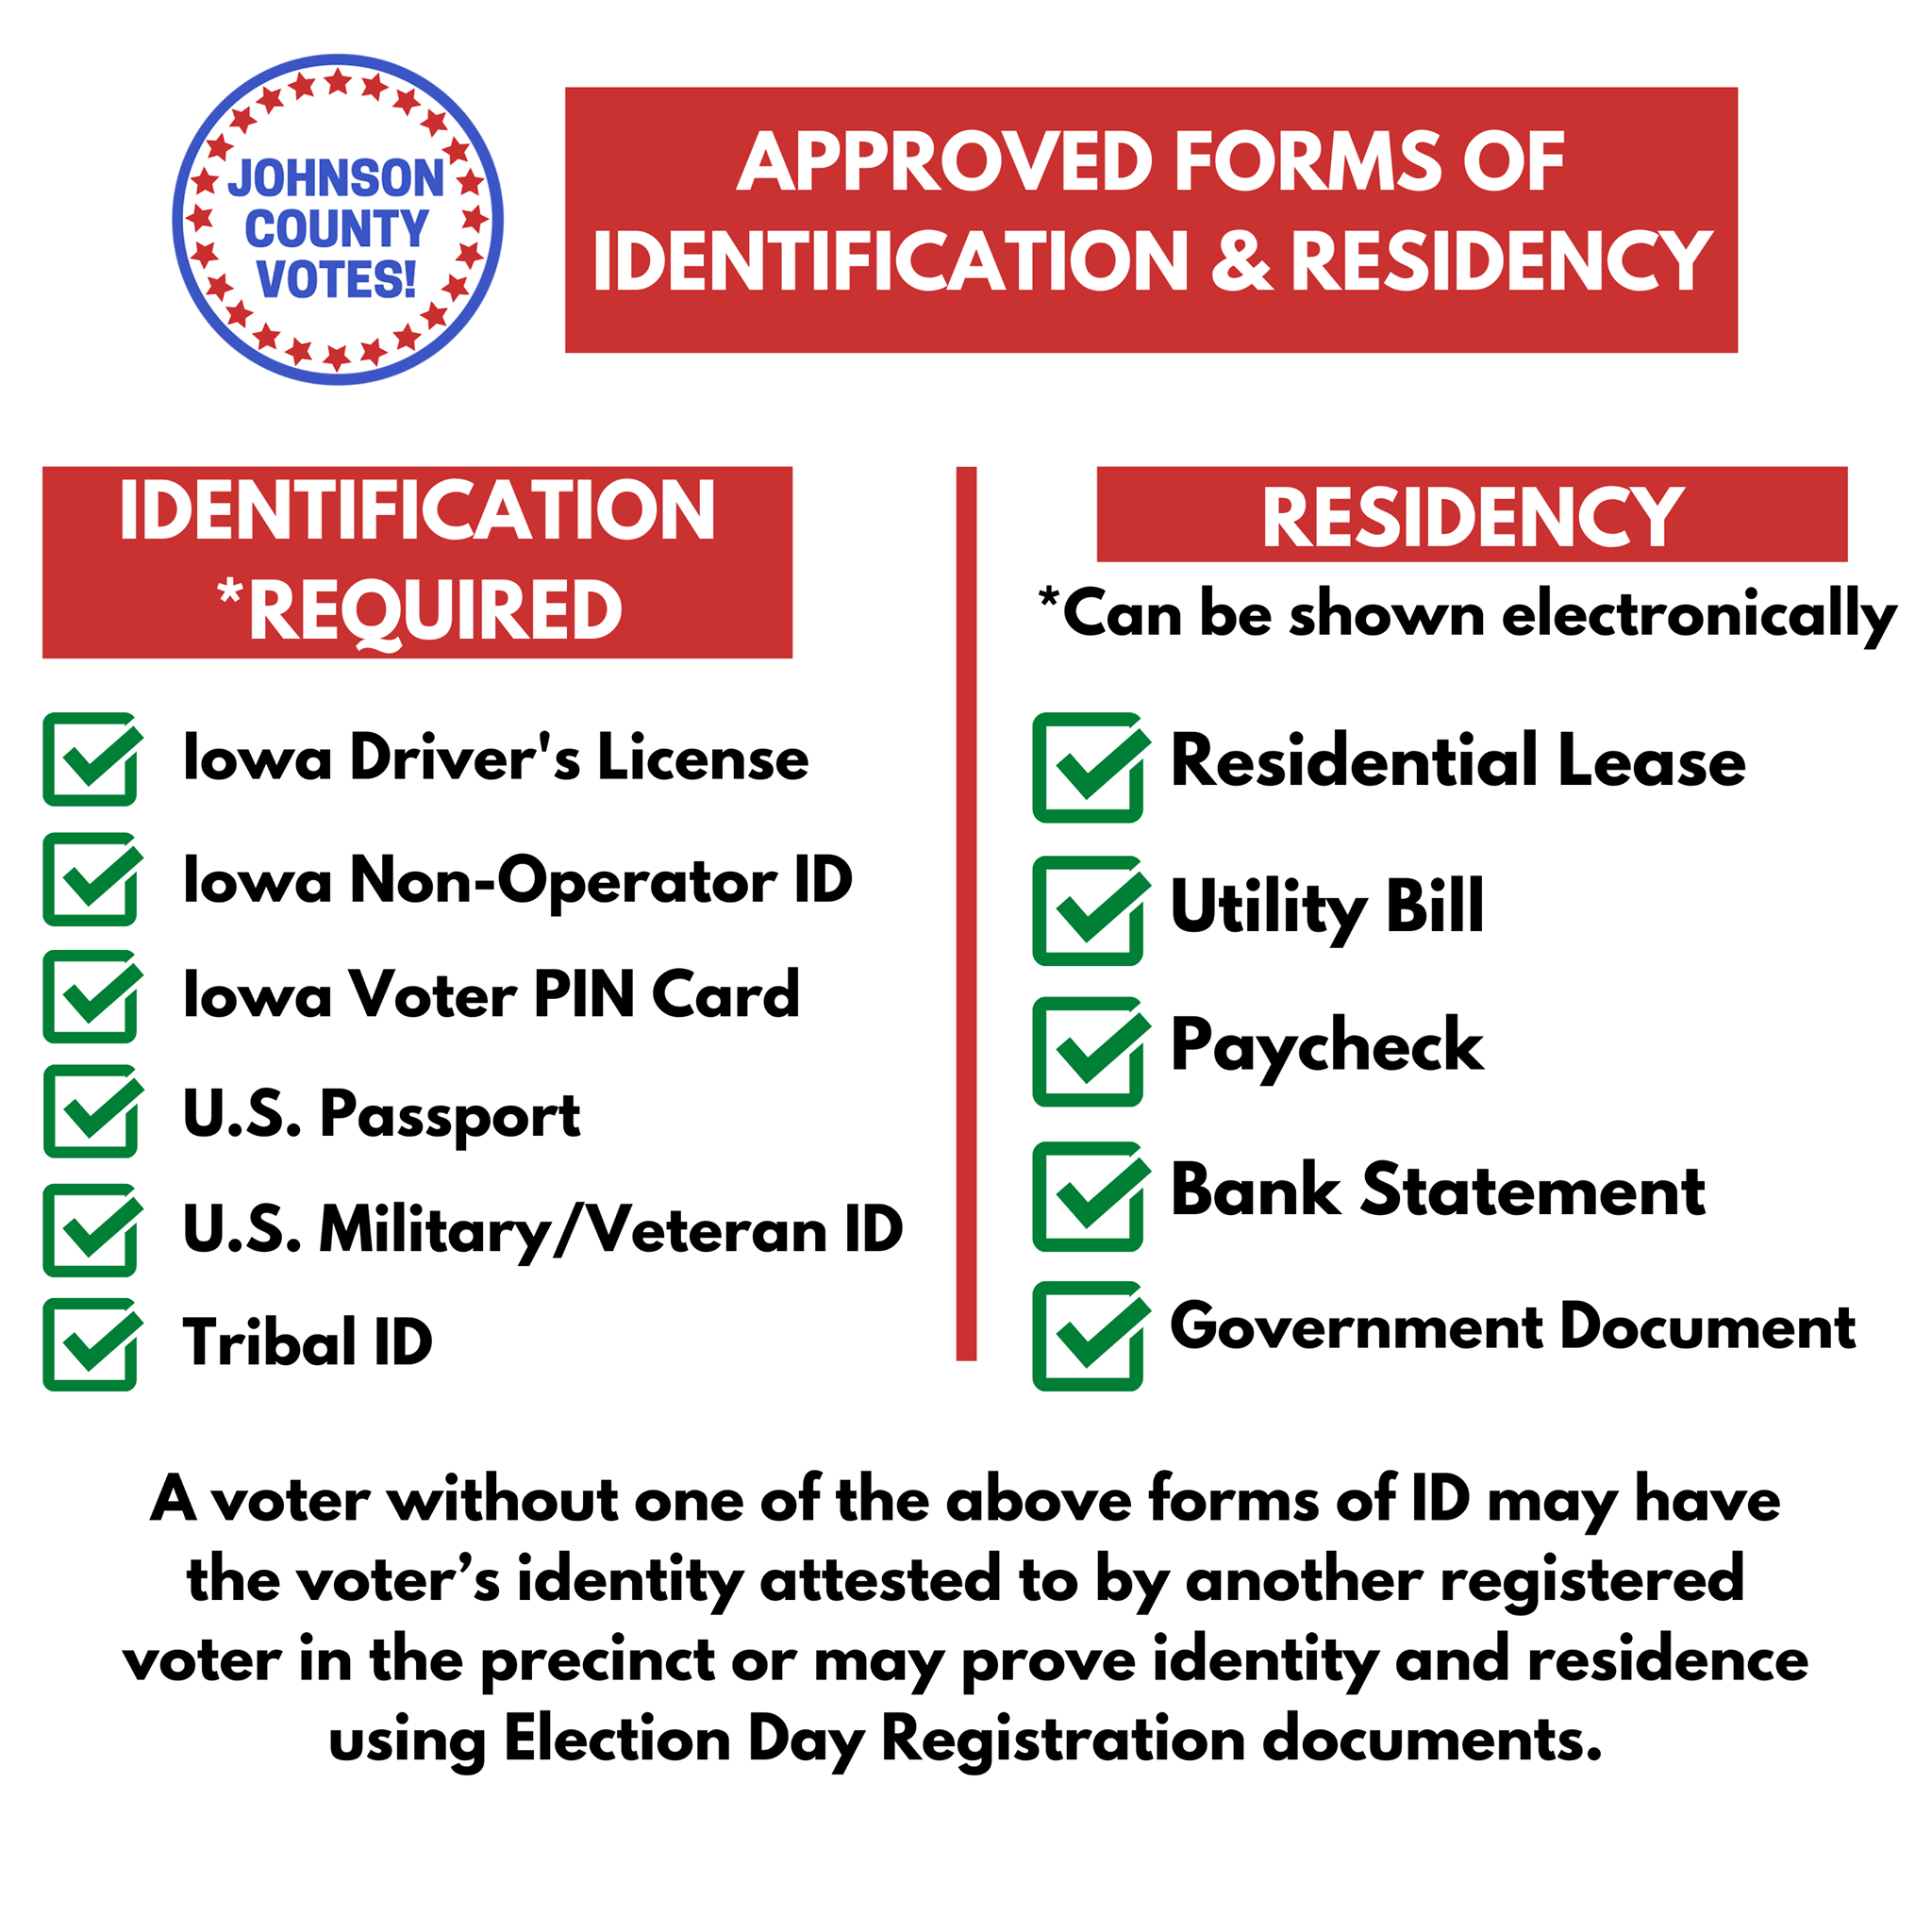 List of approved forms of ID and residency from Johnson County Auditor's office